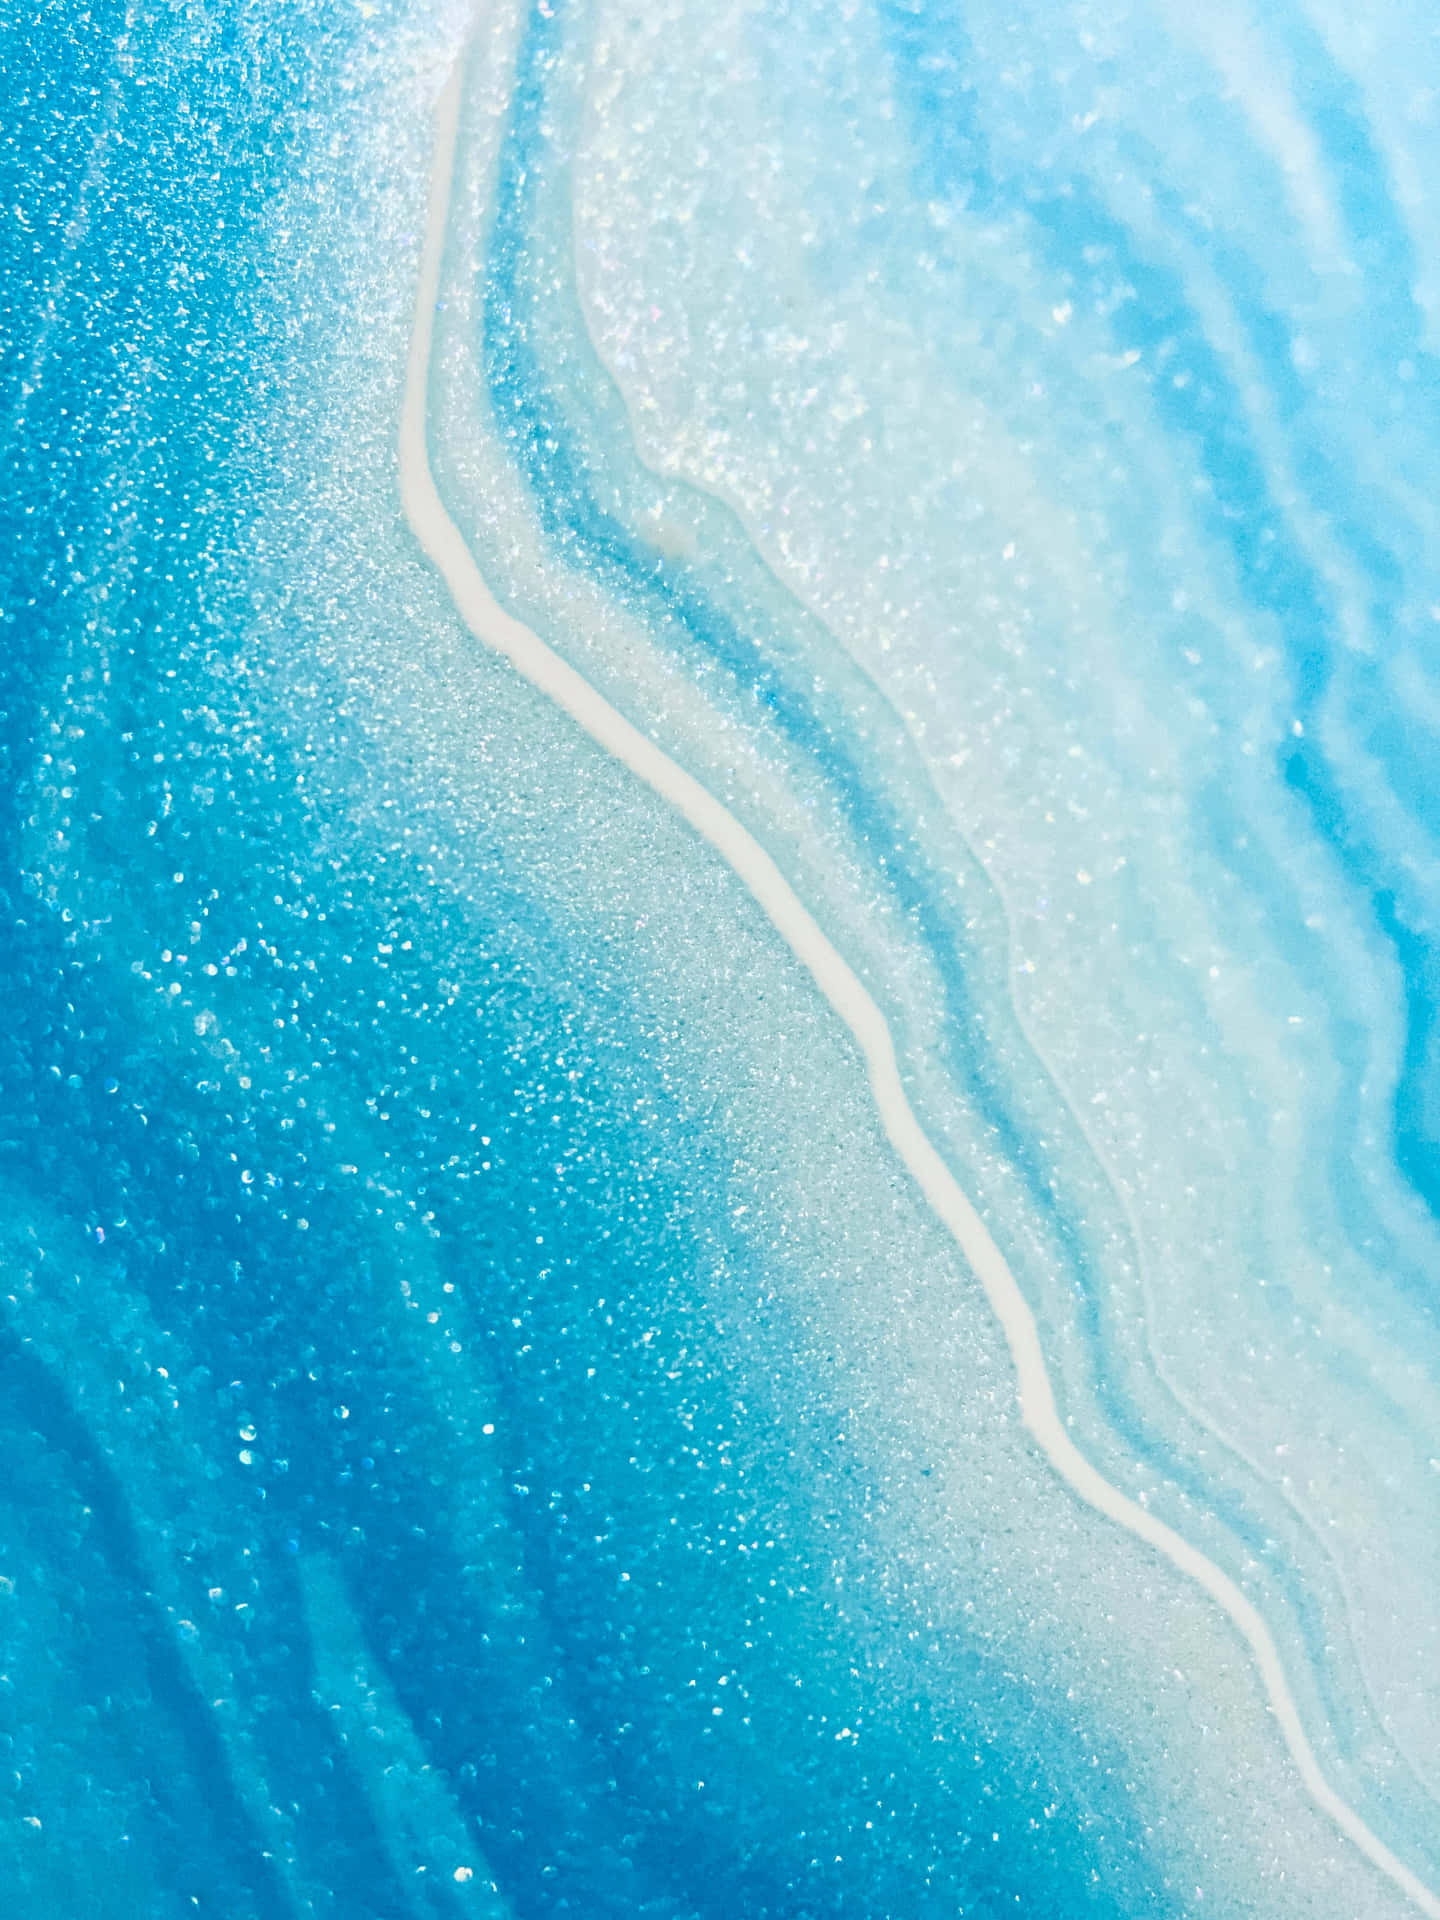 Immerse Yourself in the Ocean's Beauty Wallpaper